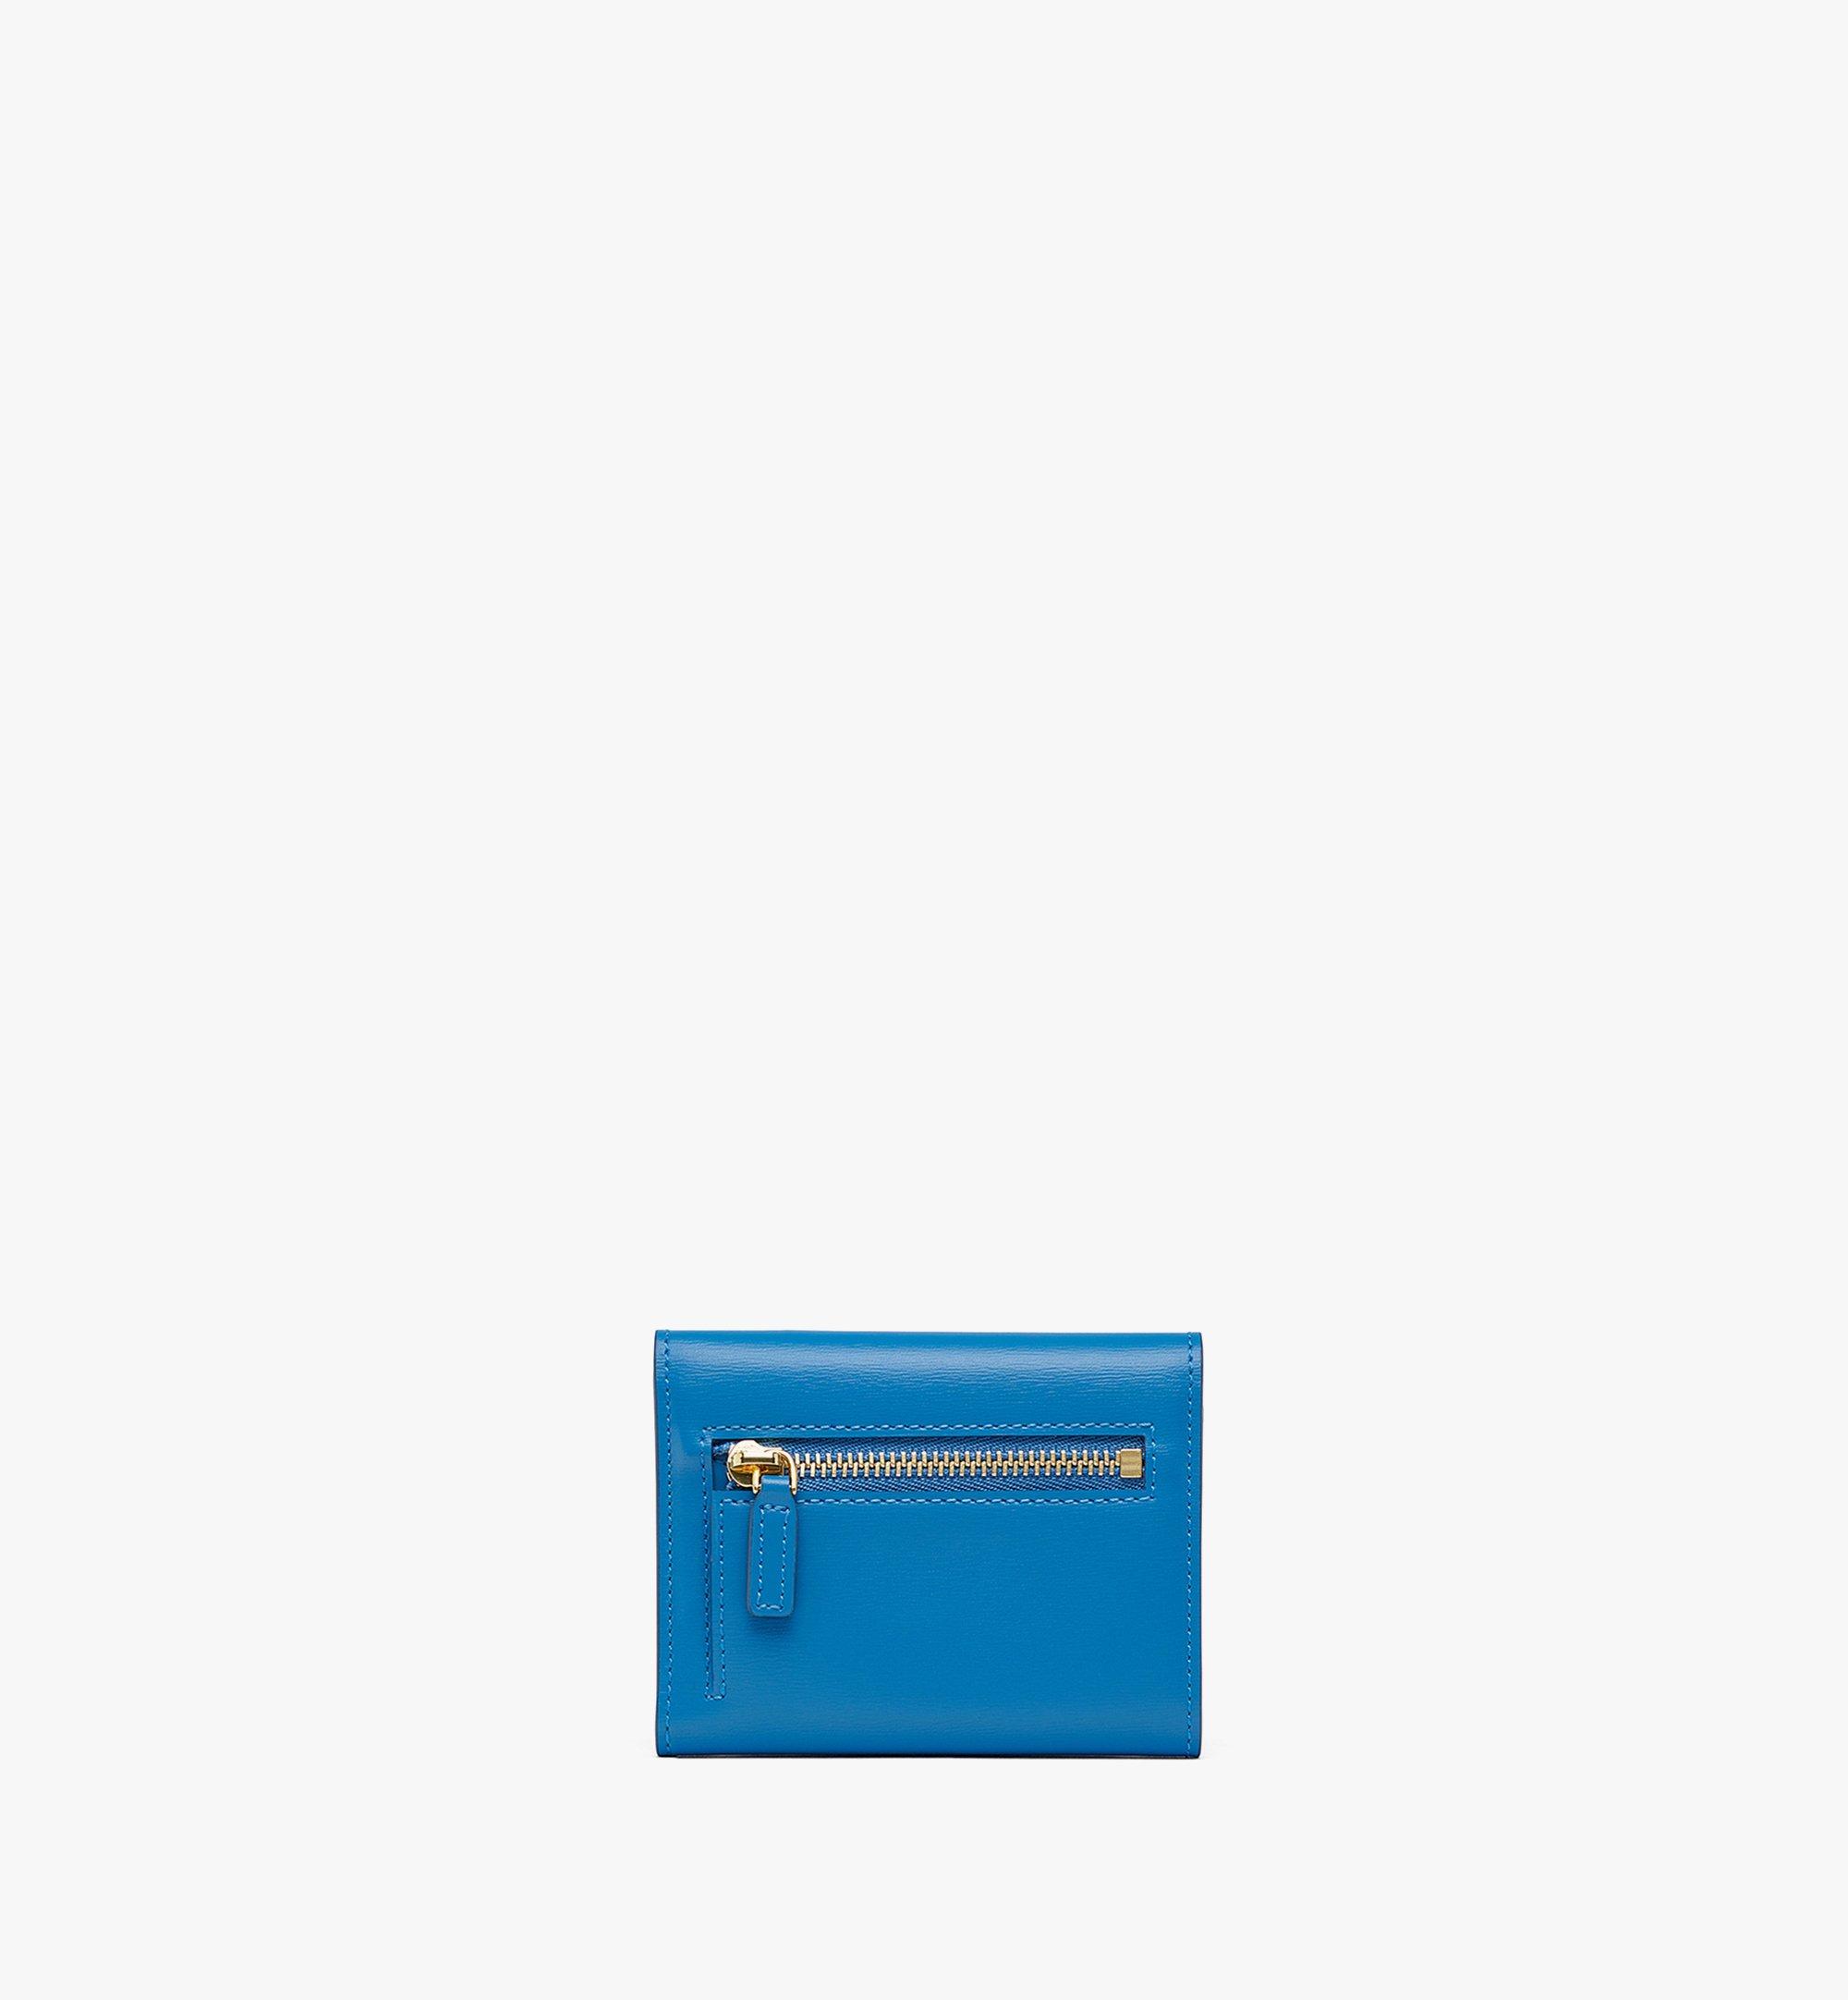 MCM Patricia Trifold Wallet in Spanish Leather Blue MYSBAPA01H9001 Alternate View 2